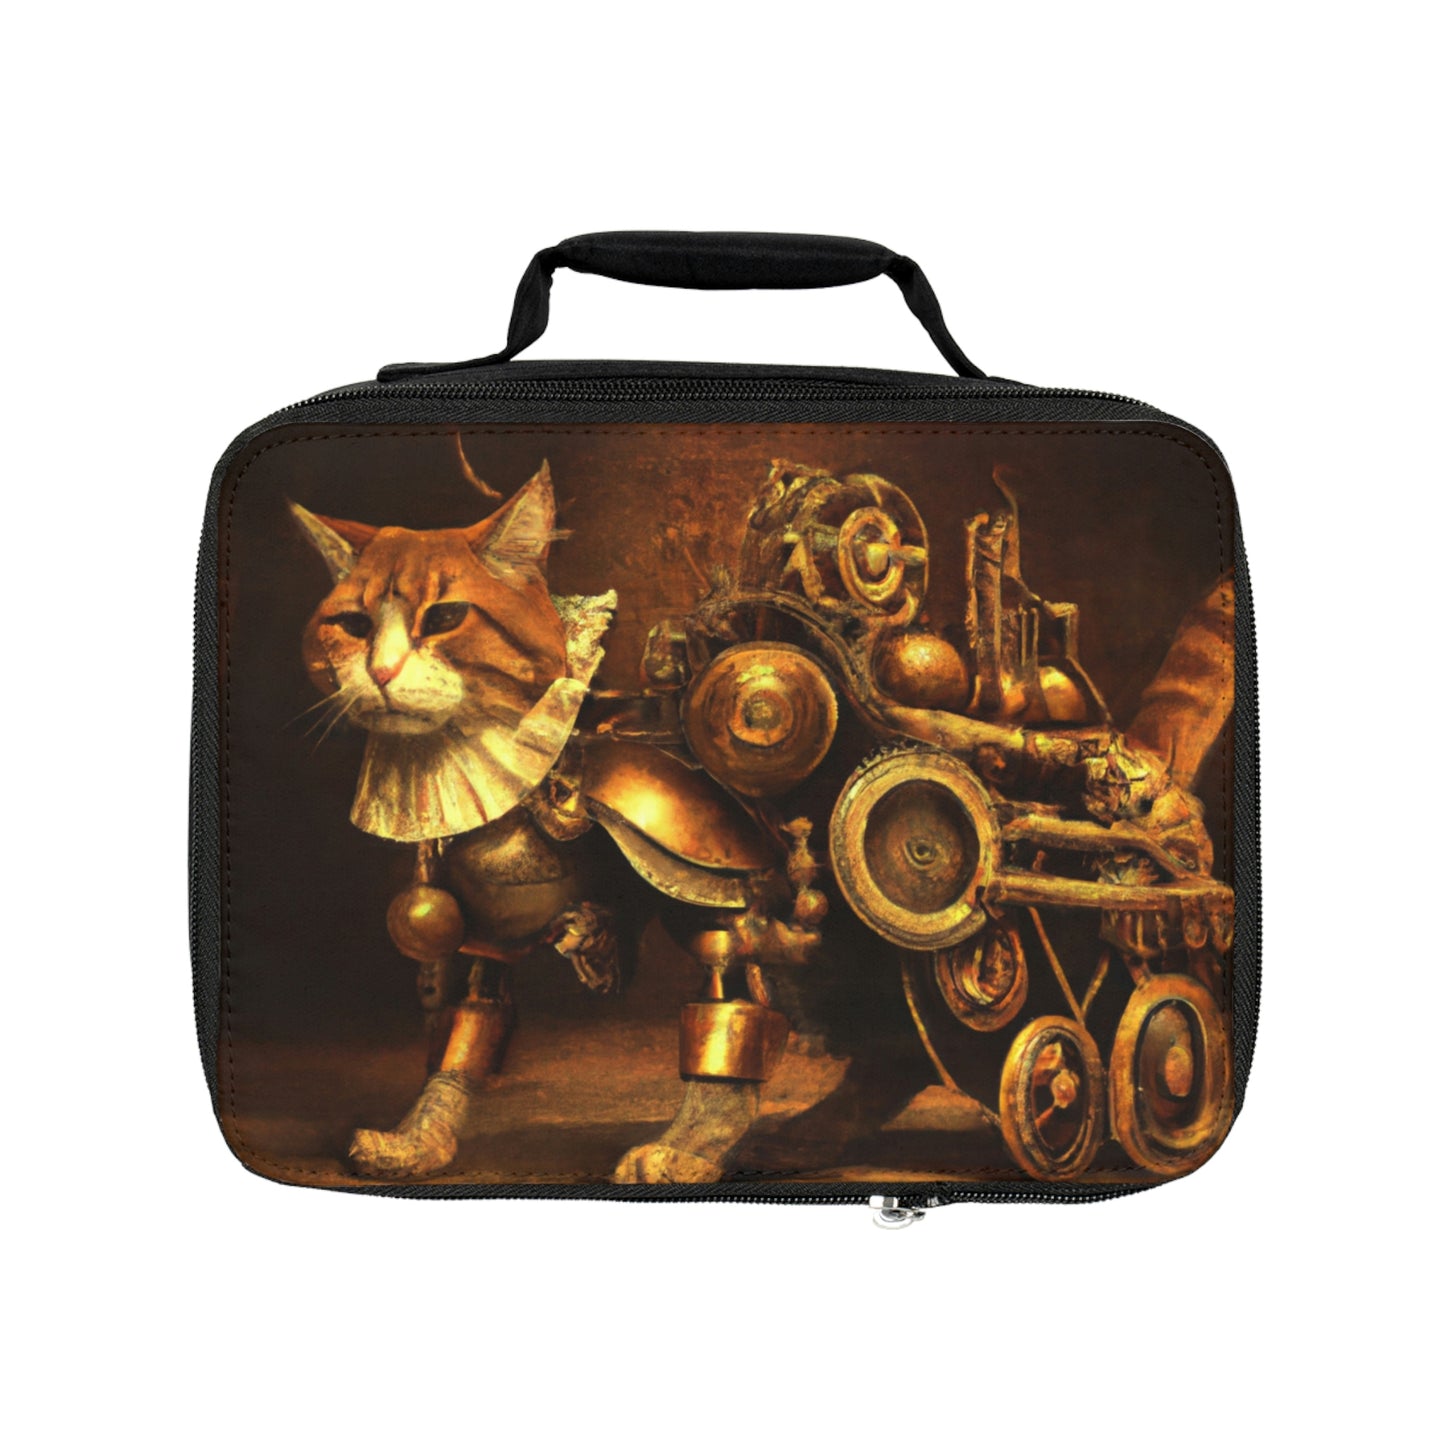 Steampunk cat Lunch Bag, cyberpunk cat Lunch tote, Victorian Lunch Bag, cat lover gift, back to School lunch bag, vintage Picnic bag gift